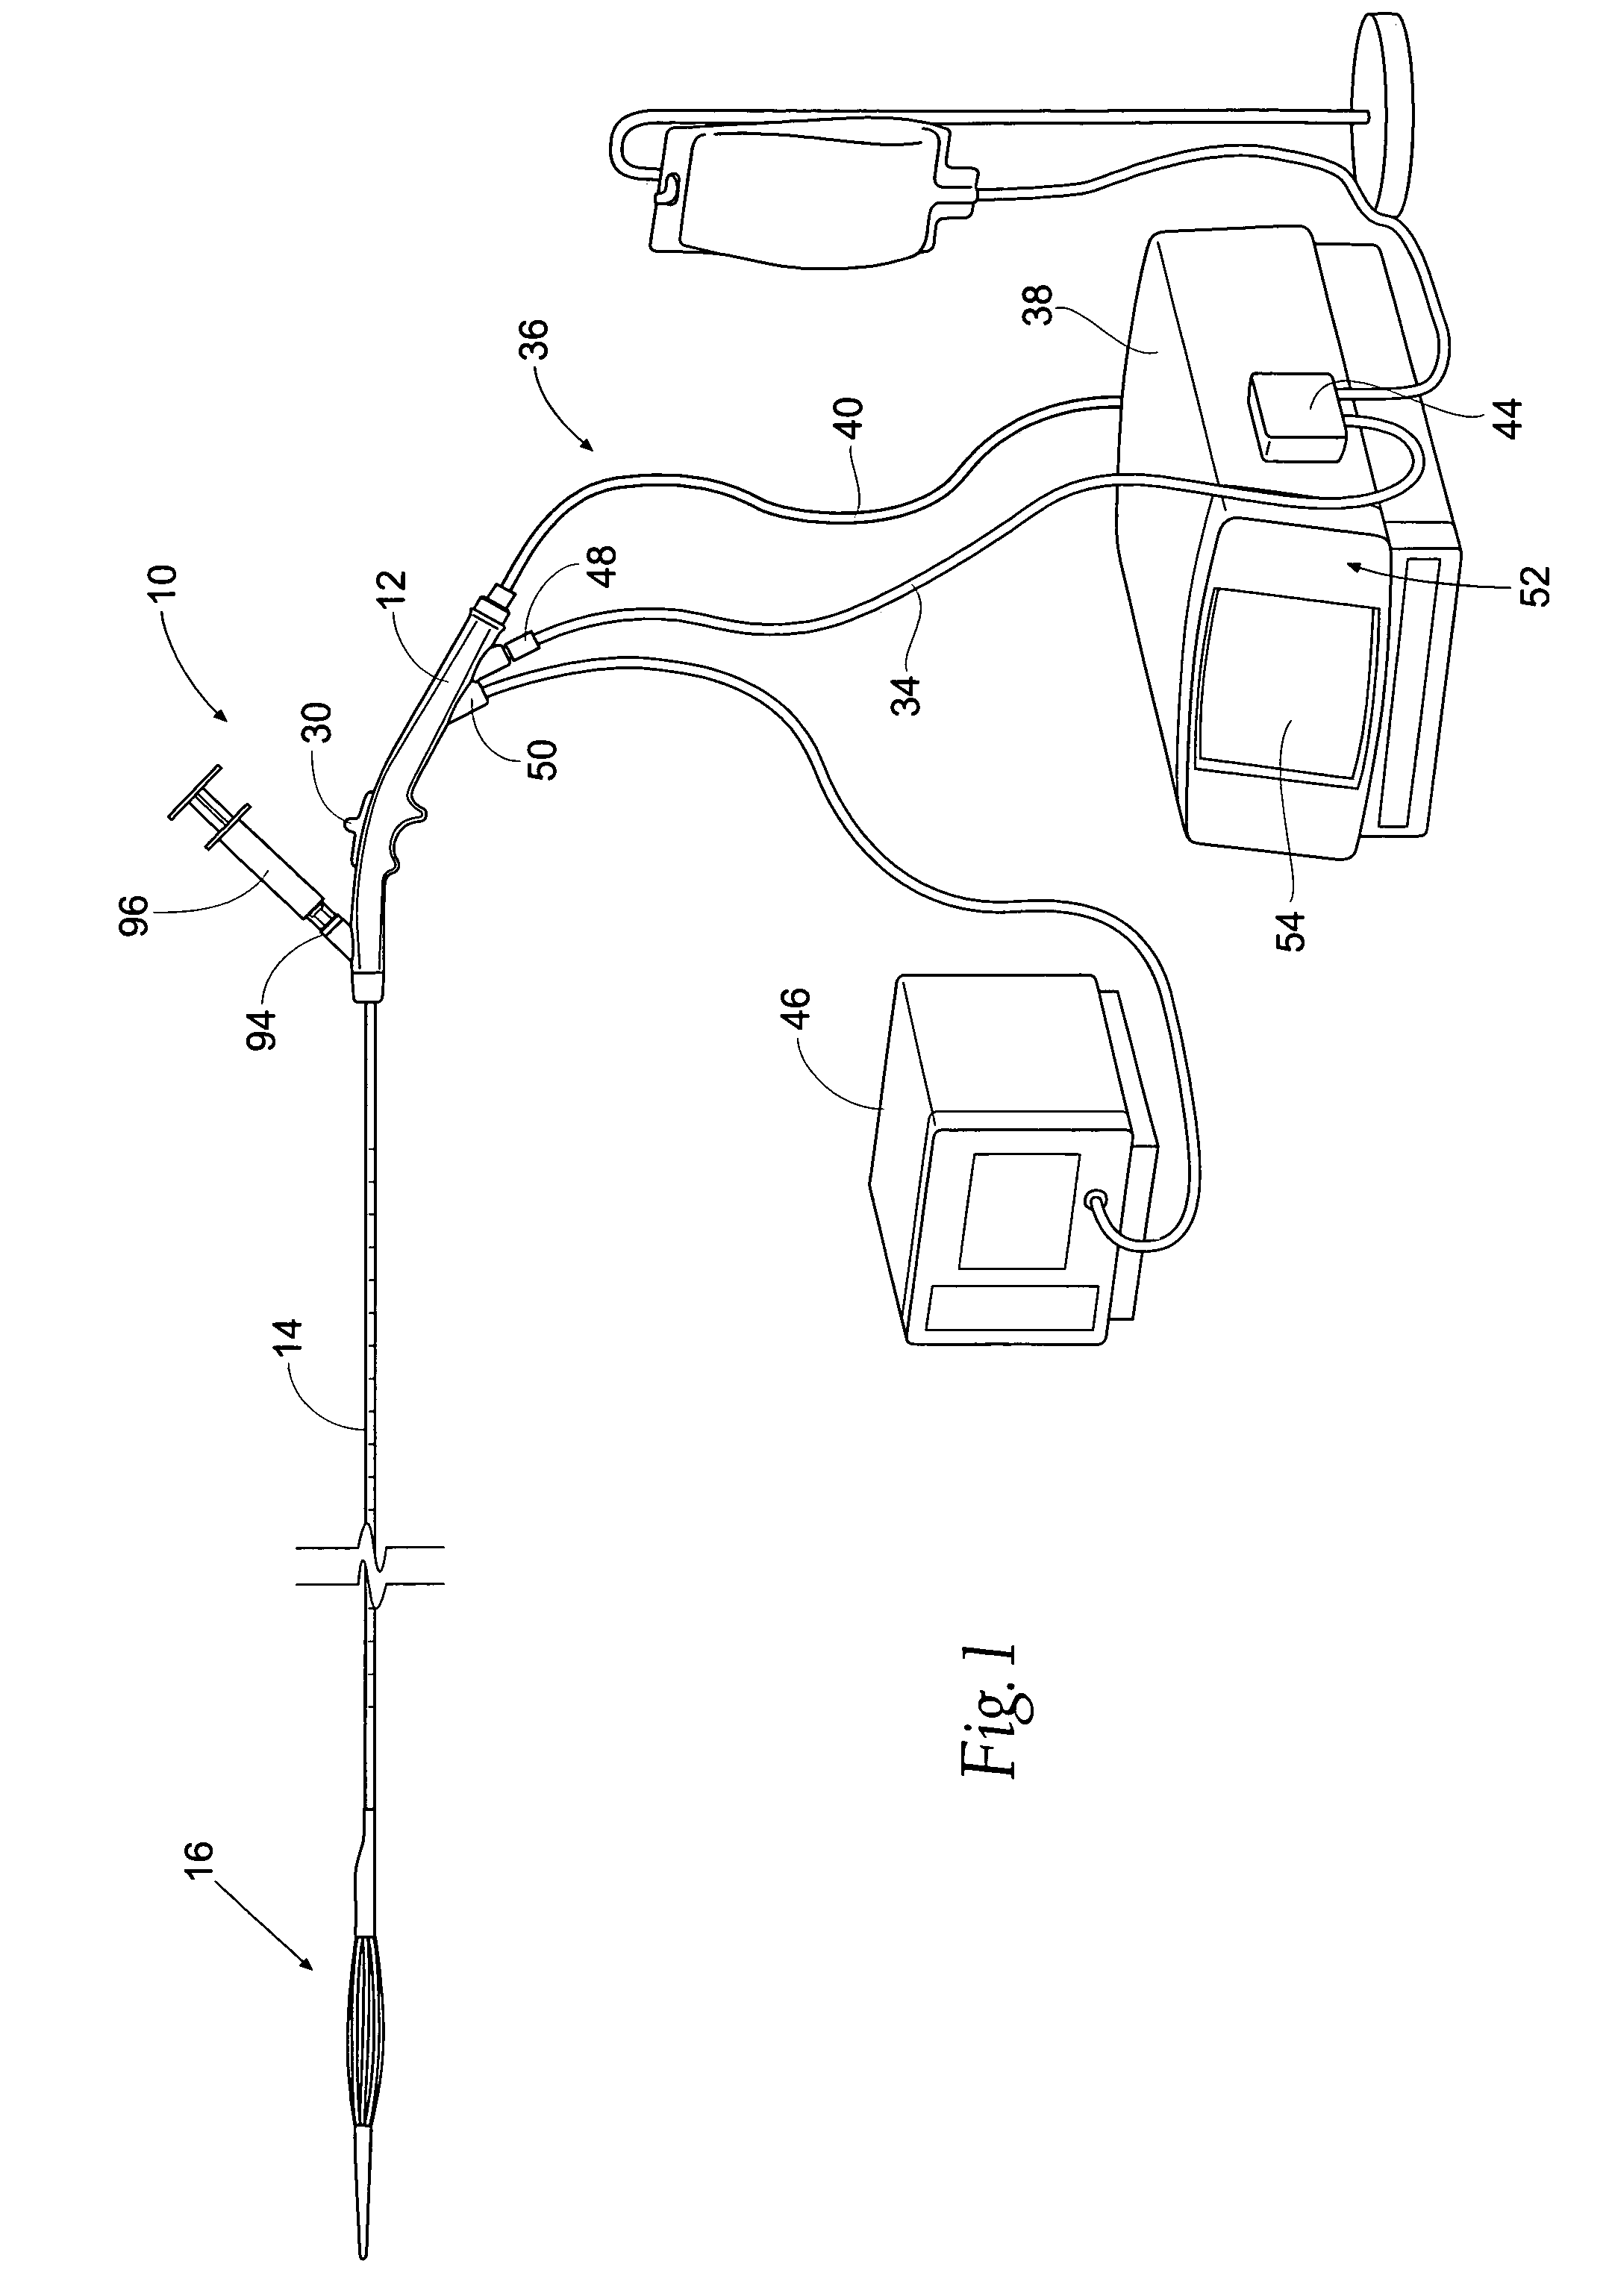 Devices, systems and methods for treating tissue regions of the body